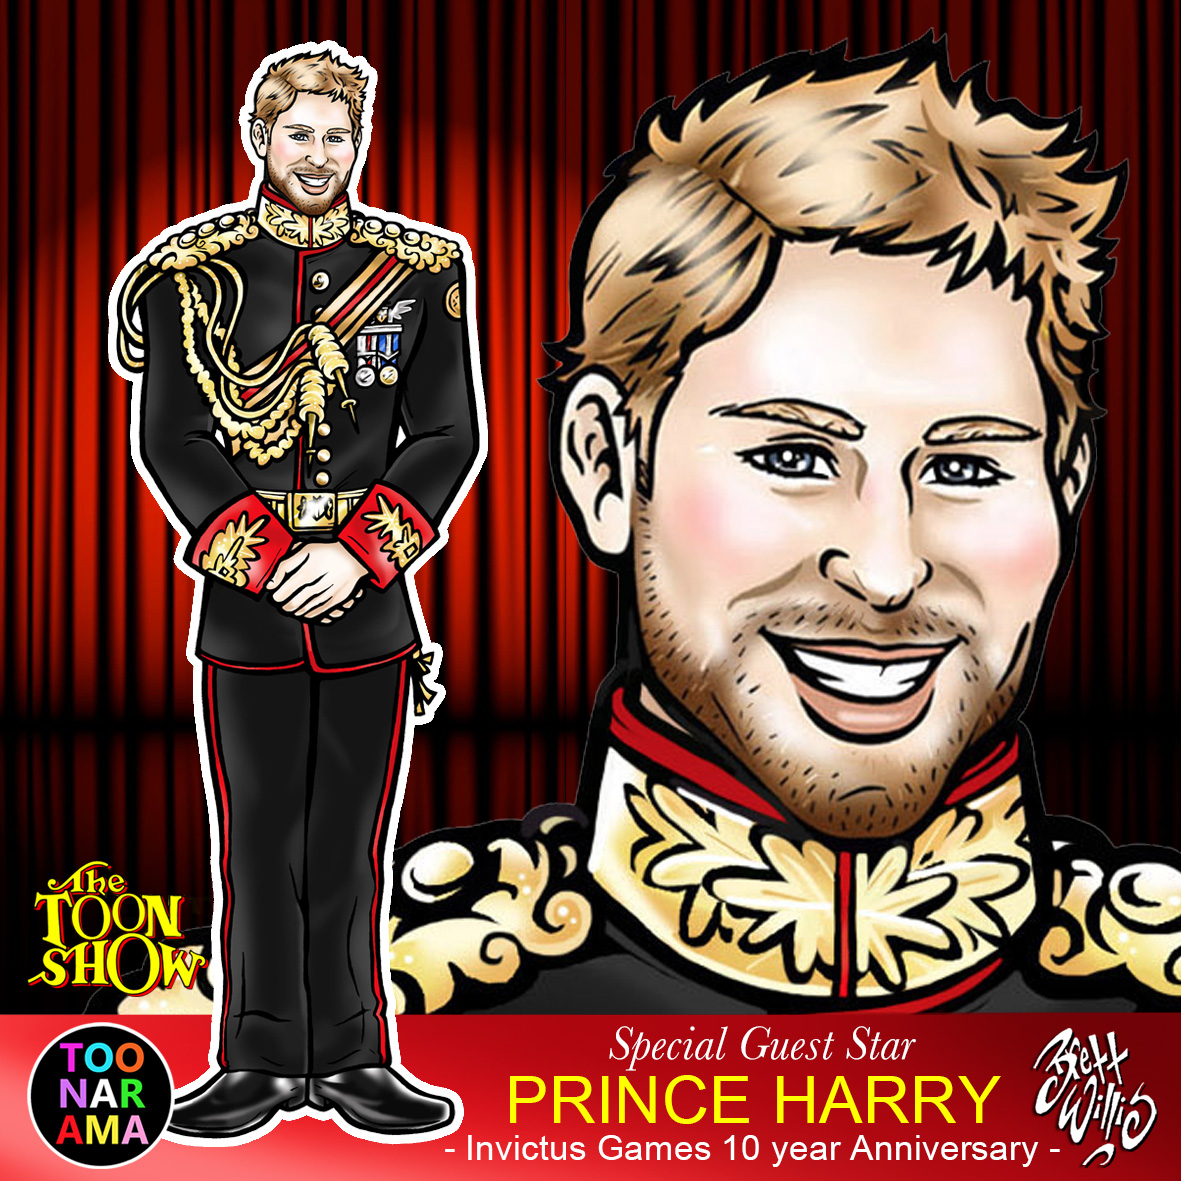 The TOON Show Special Guest Star Newsmaker TOON of the Week: PRINCE HARRY - Celebrating INVICTUS Games 10 year Anniversary - #PrinceHarry #InvictusGames #10YearAnniversary #celebration #toonarama